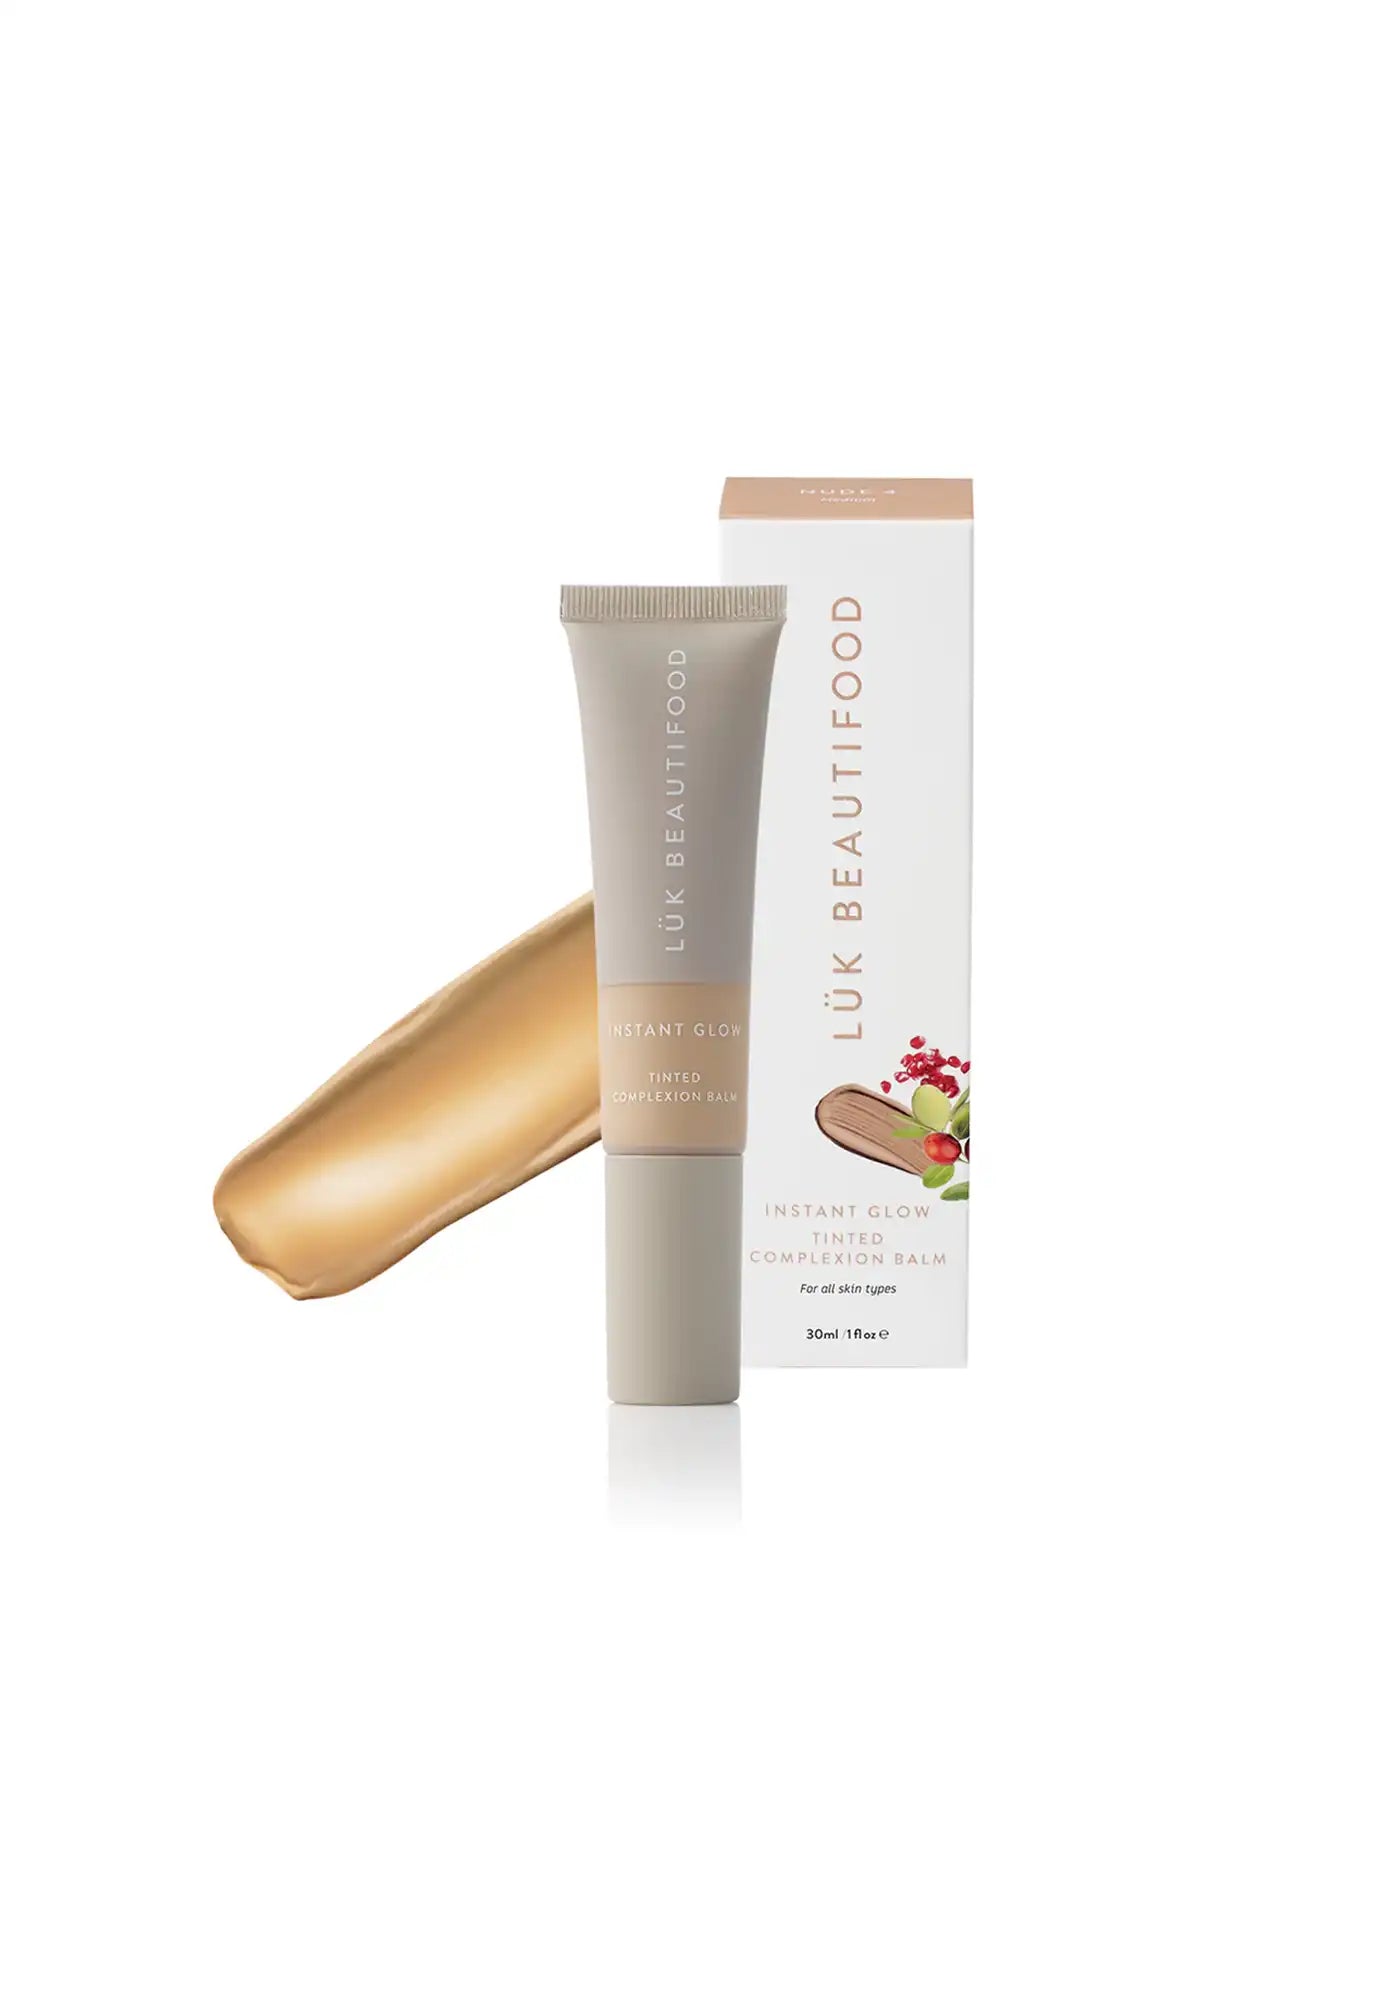 luk beautifood - instant glow tinted complexion balm